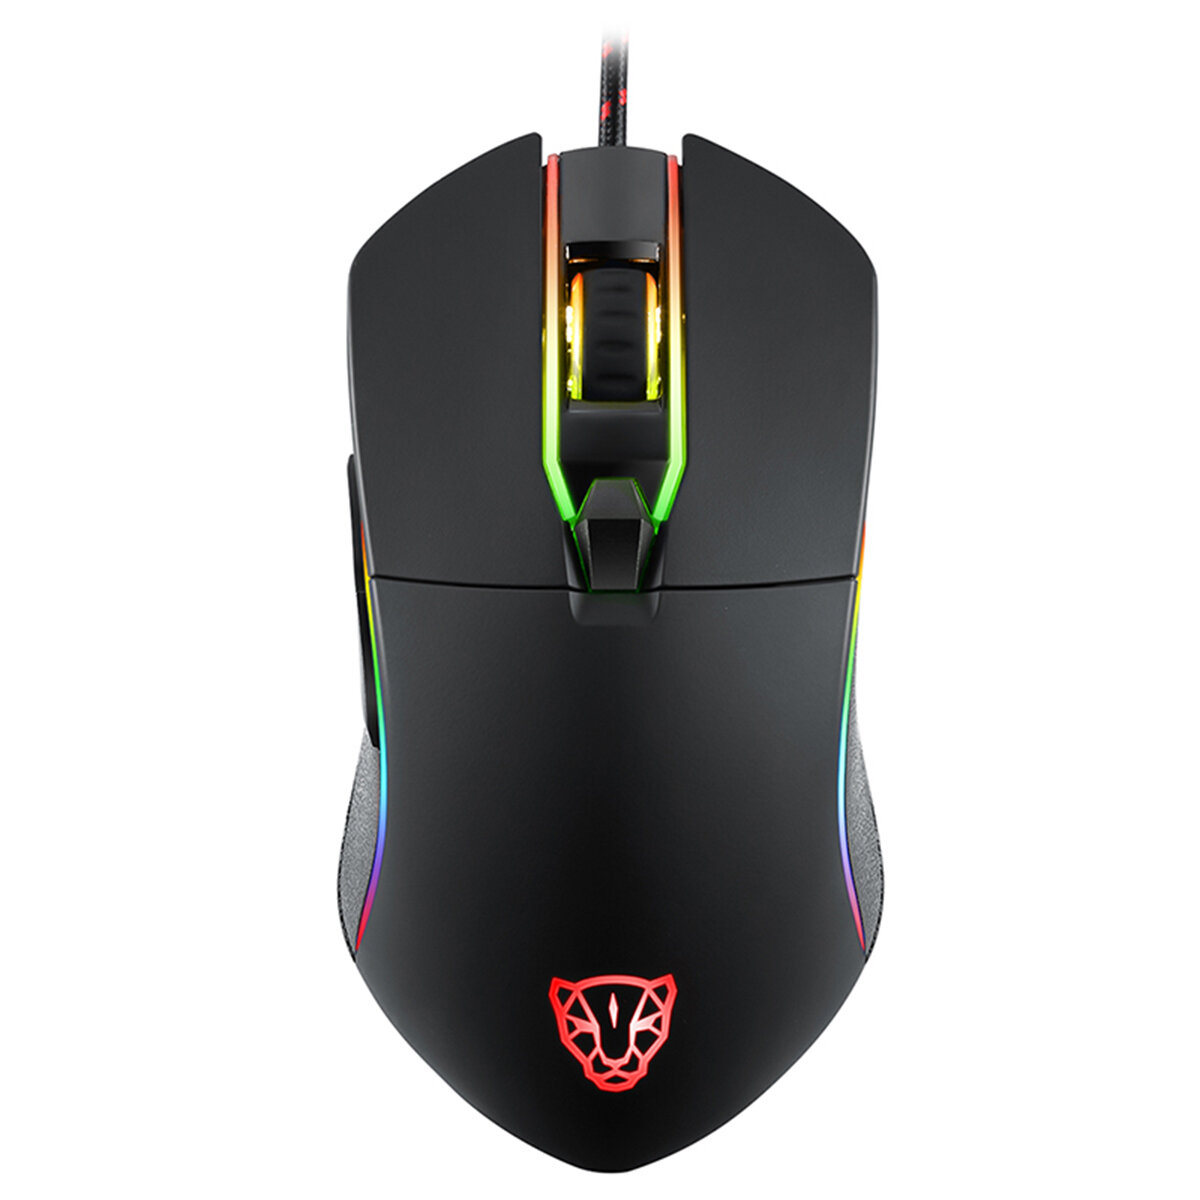 best price,motospeed,v30,gaming,mouse,discount